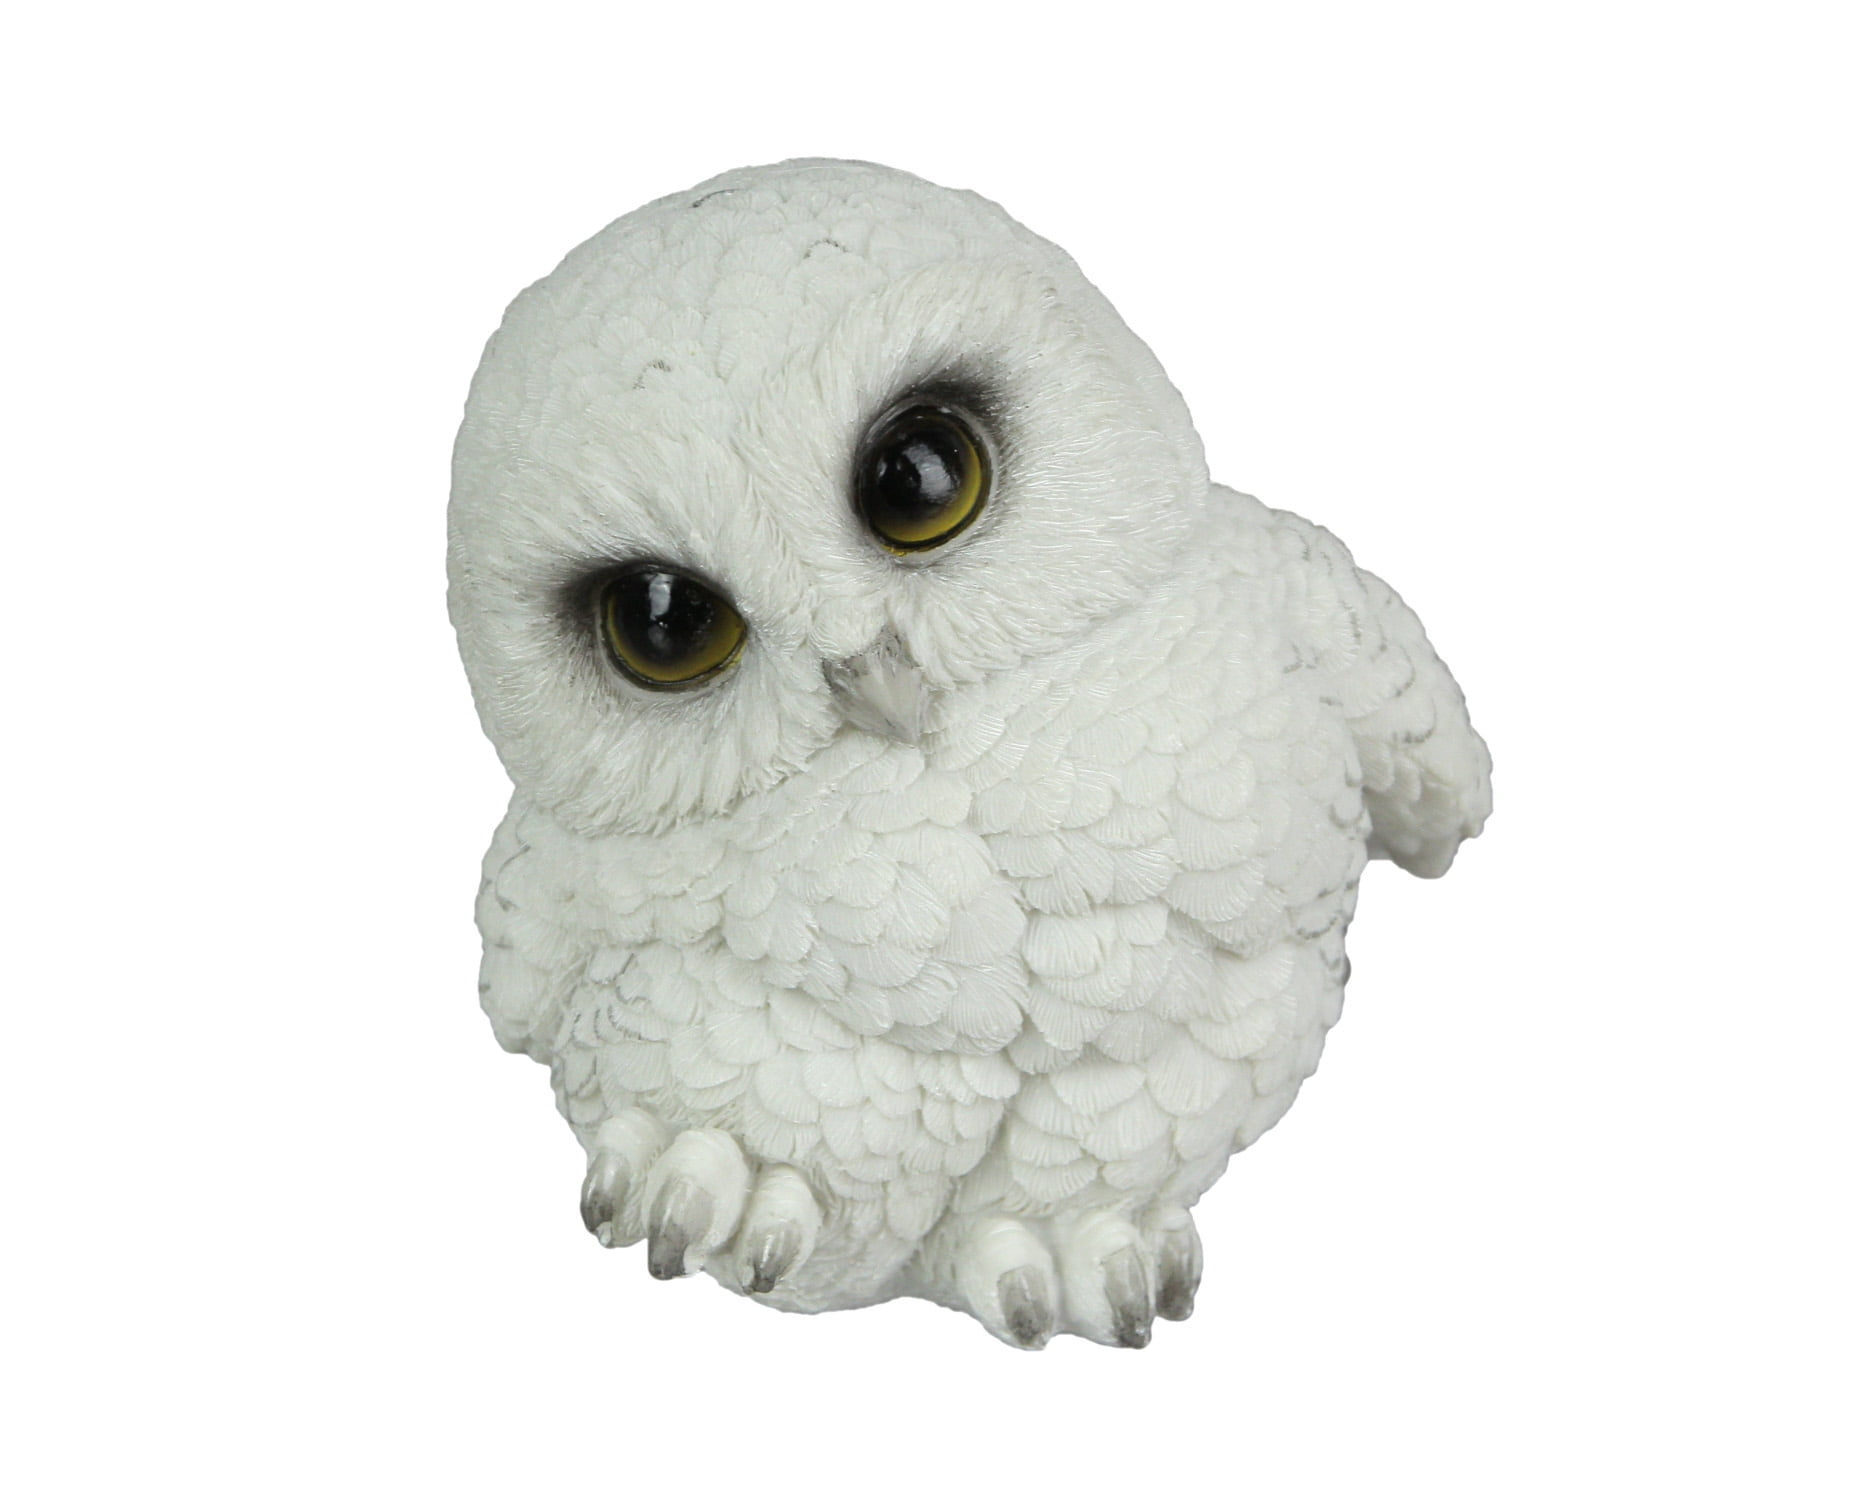 NEW HOLIDAY ADORABLE WHITE SNOW OWL OWLS BIRDS FIGURES STATUES 3 STYLES 